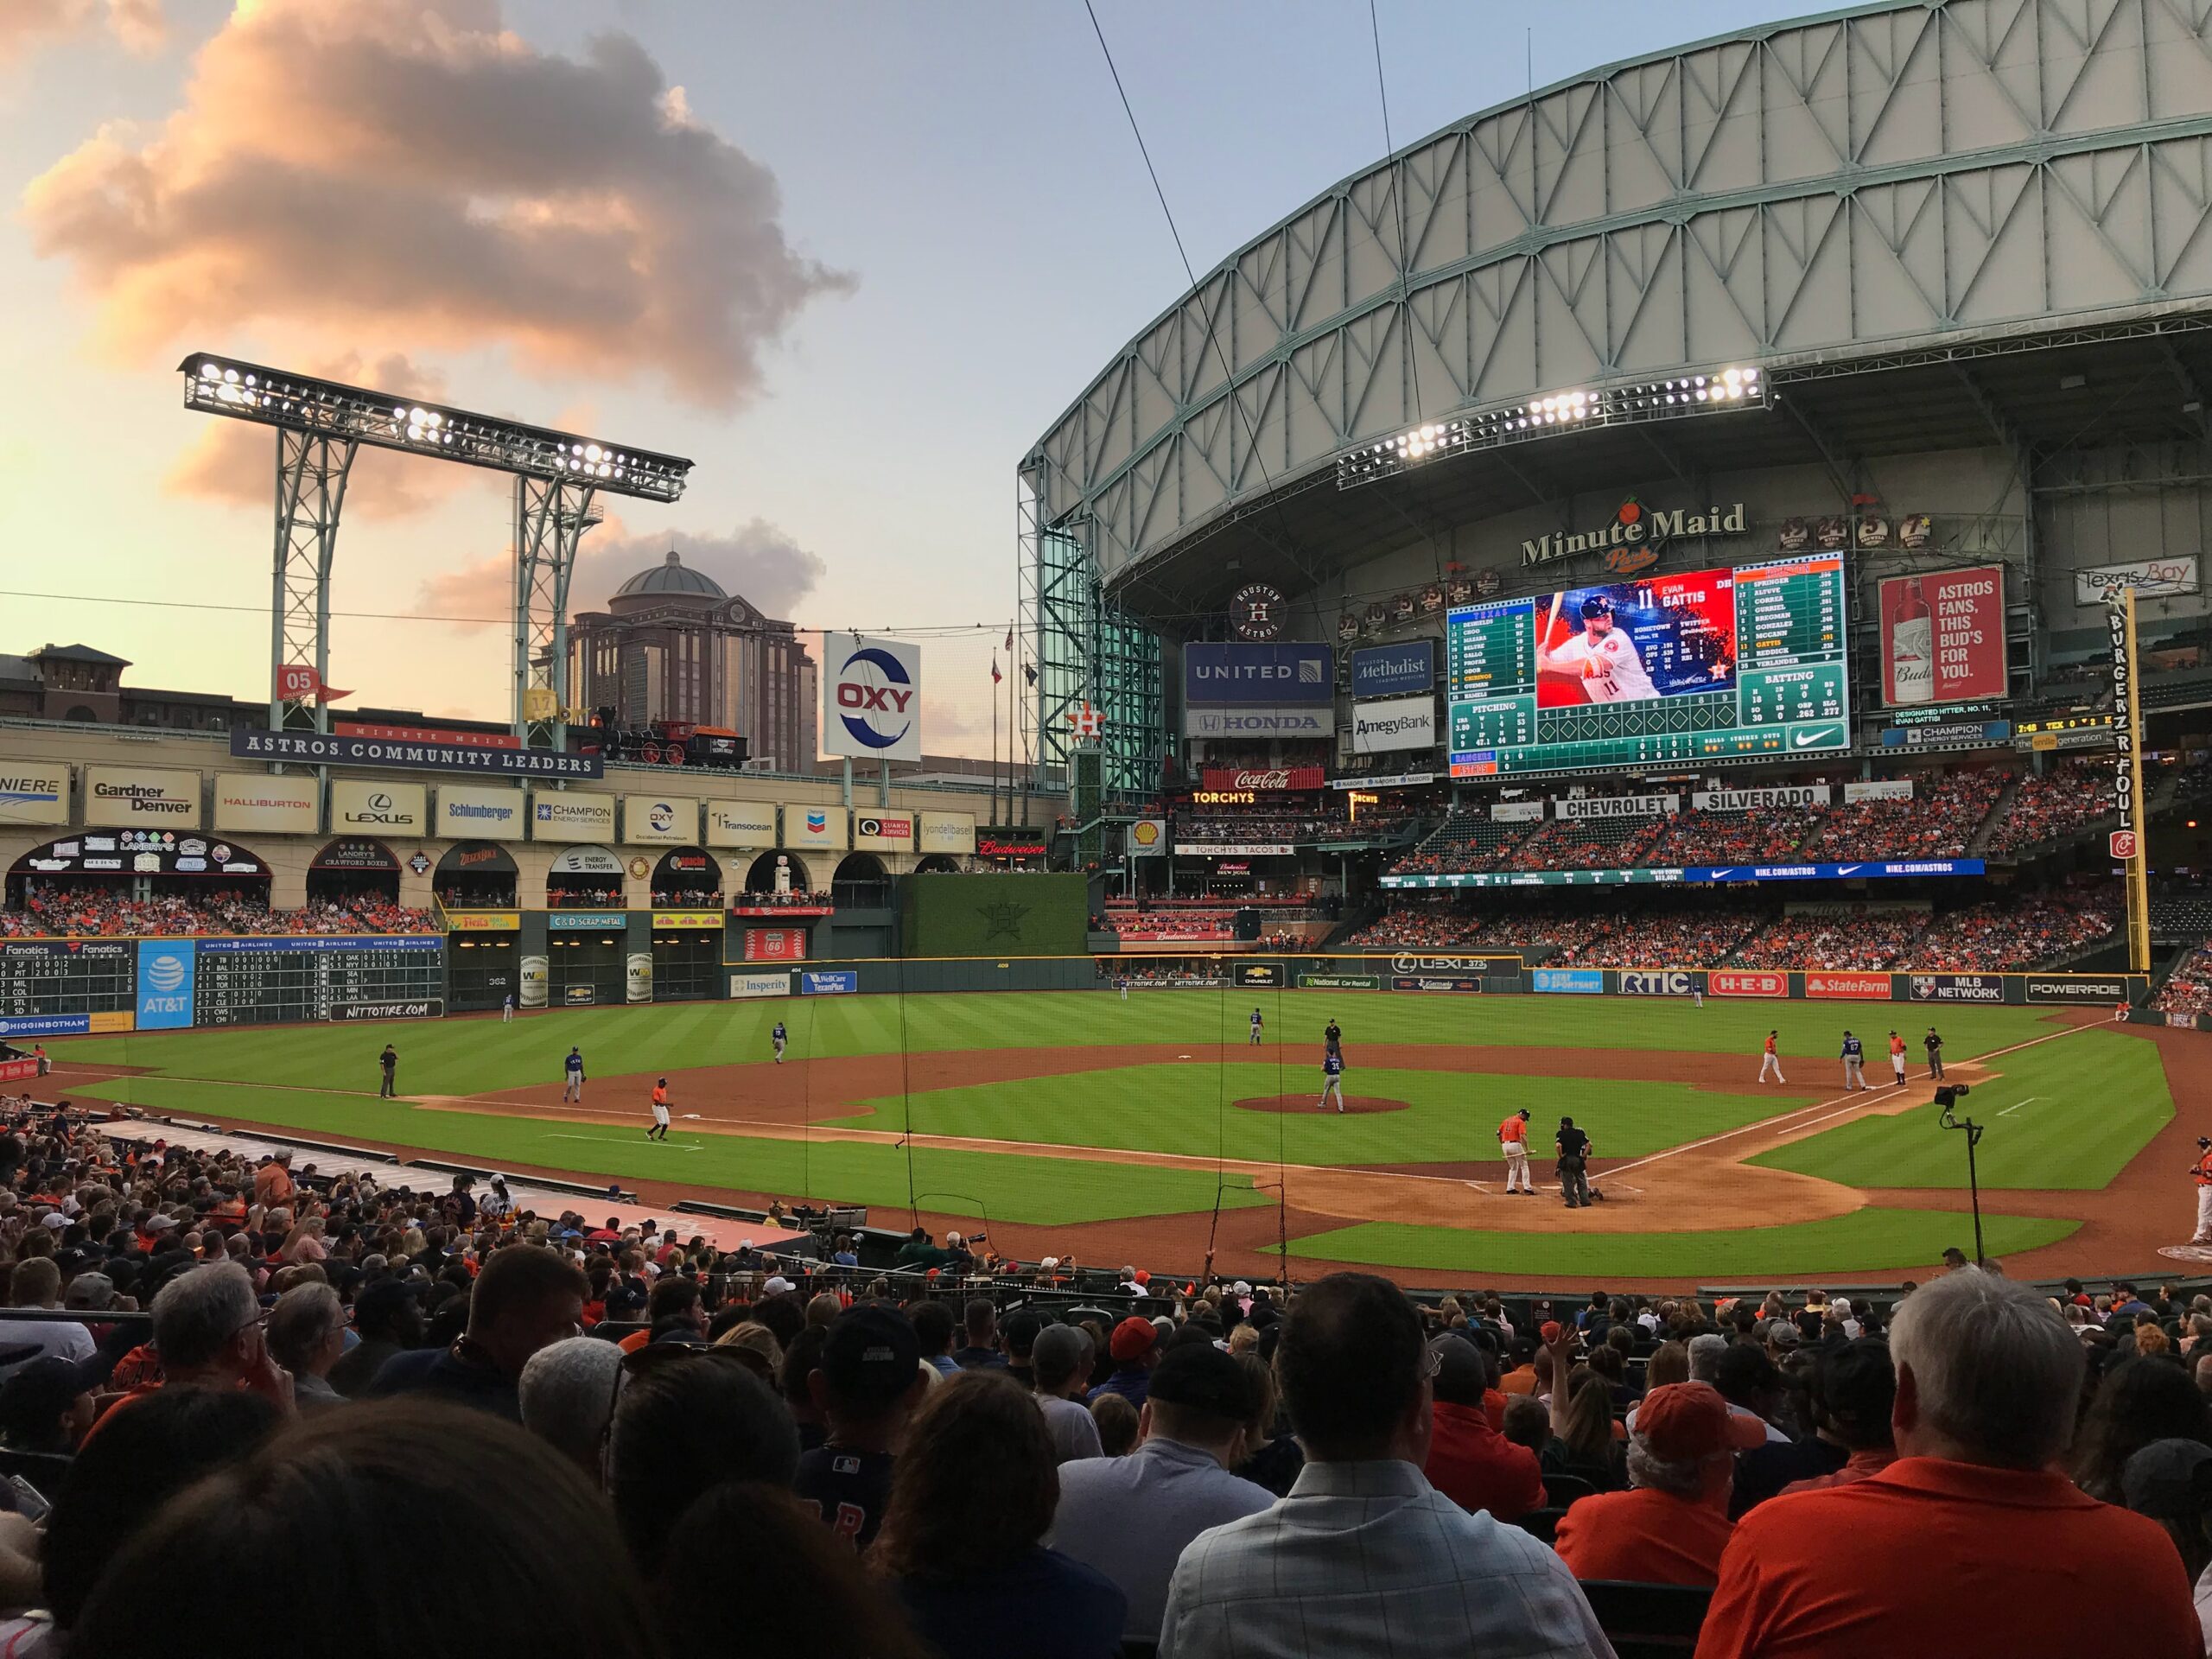 Houston is one of the best places to live in Texas for sports fans, Beyoncé and Megan Thee Stallion fans and for those who want to live in the largest city in Texas. Pictured: A baseball game at Minute Maid Park in Houston.